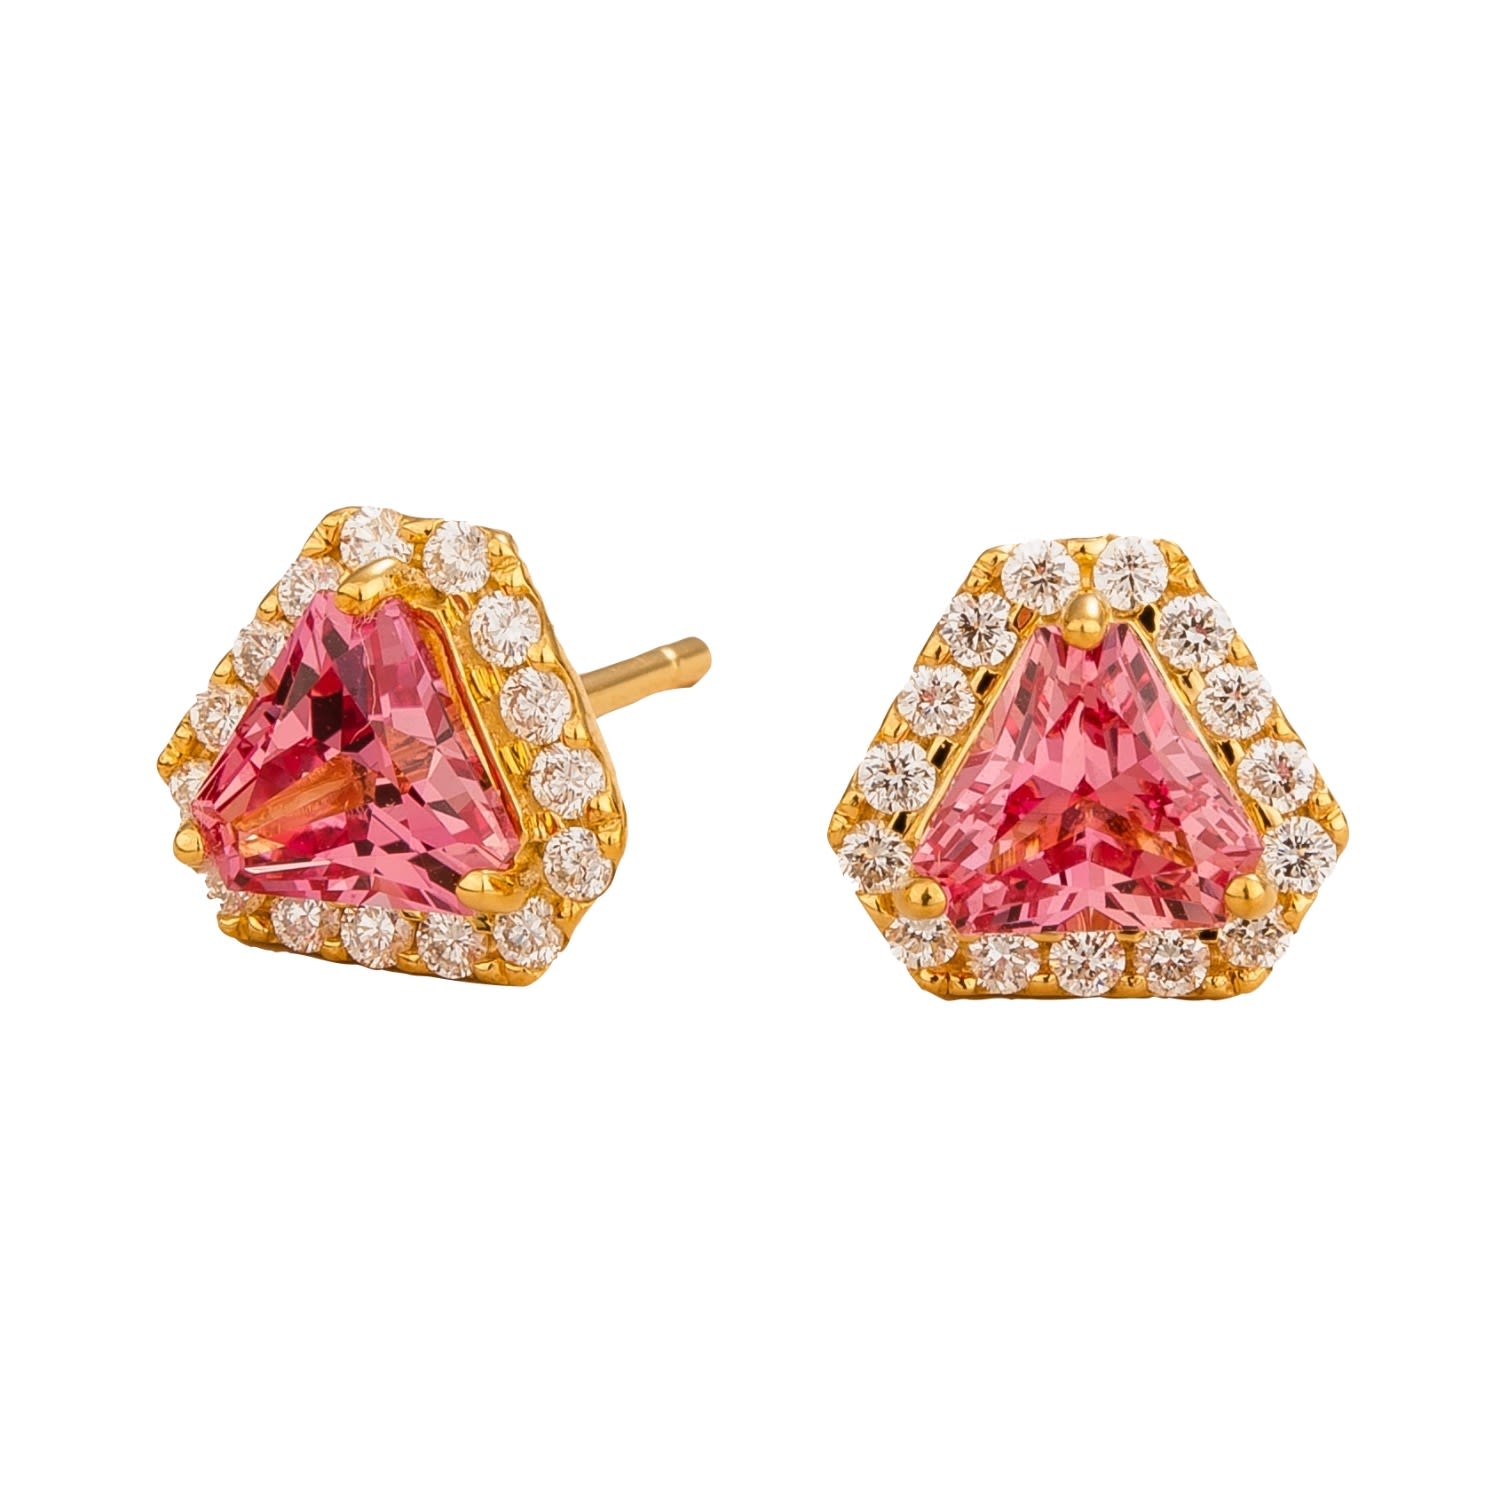 Juvetti Women's Pink / Purple / Yellow Diana Gold Earrings With Padparadscha Sapphires And Diamonds